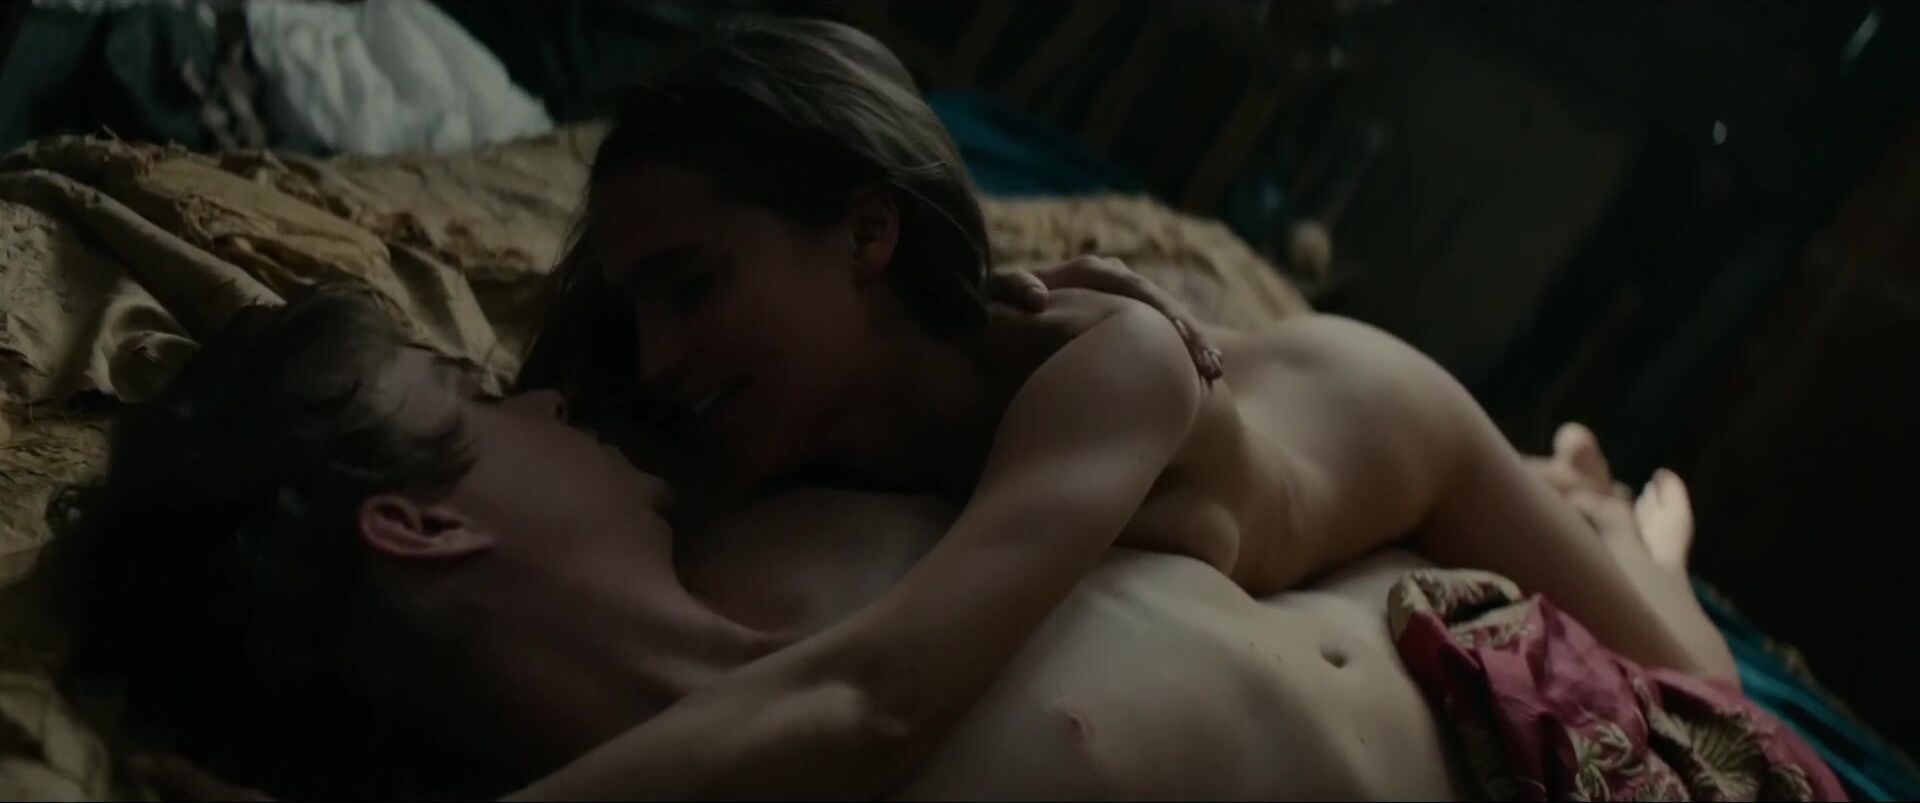 DuckyFaces Hot sex scenes of Alicia Vikander and other actresses being penetrated in Tulip Fever Stepdaughter - 2